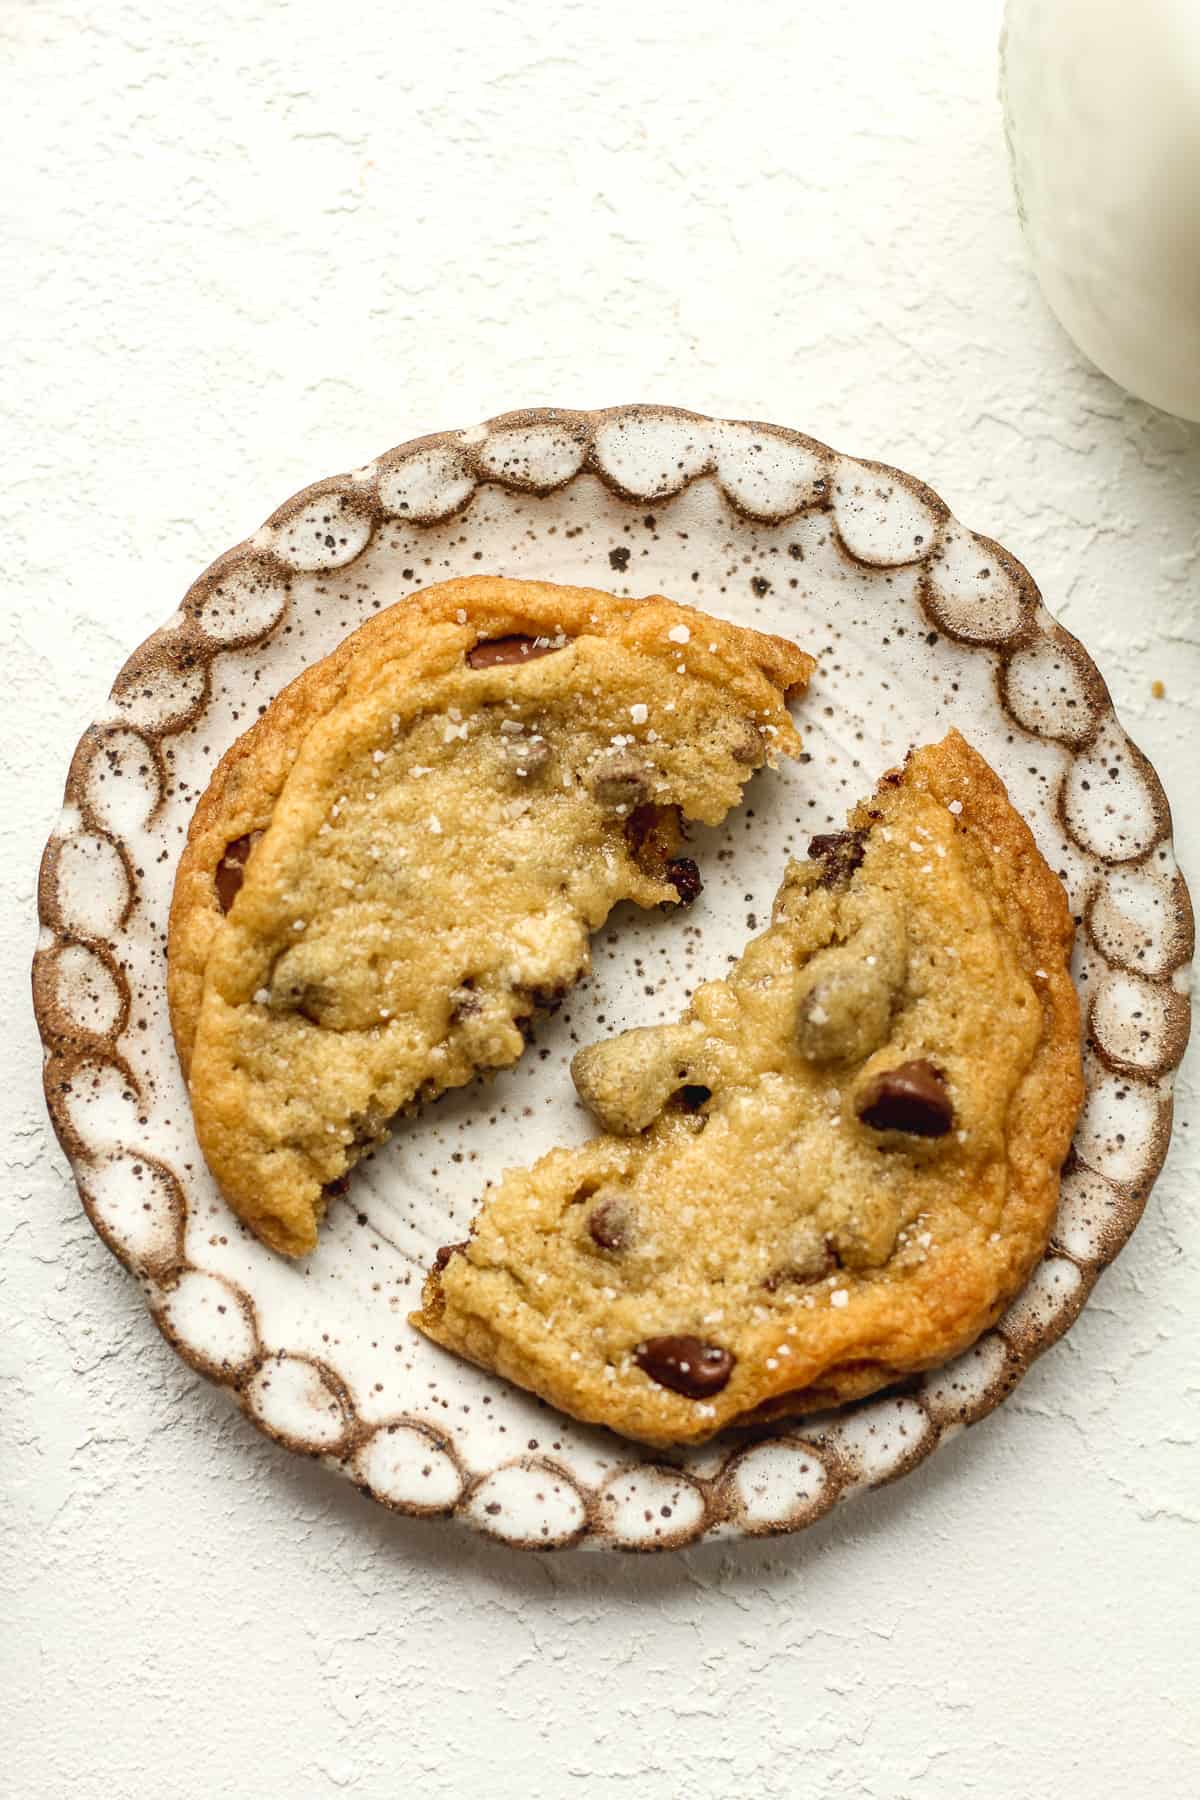 A small plate of a halved chocolate chip cookie with a glass of milk.